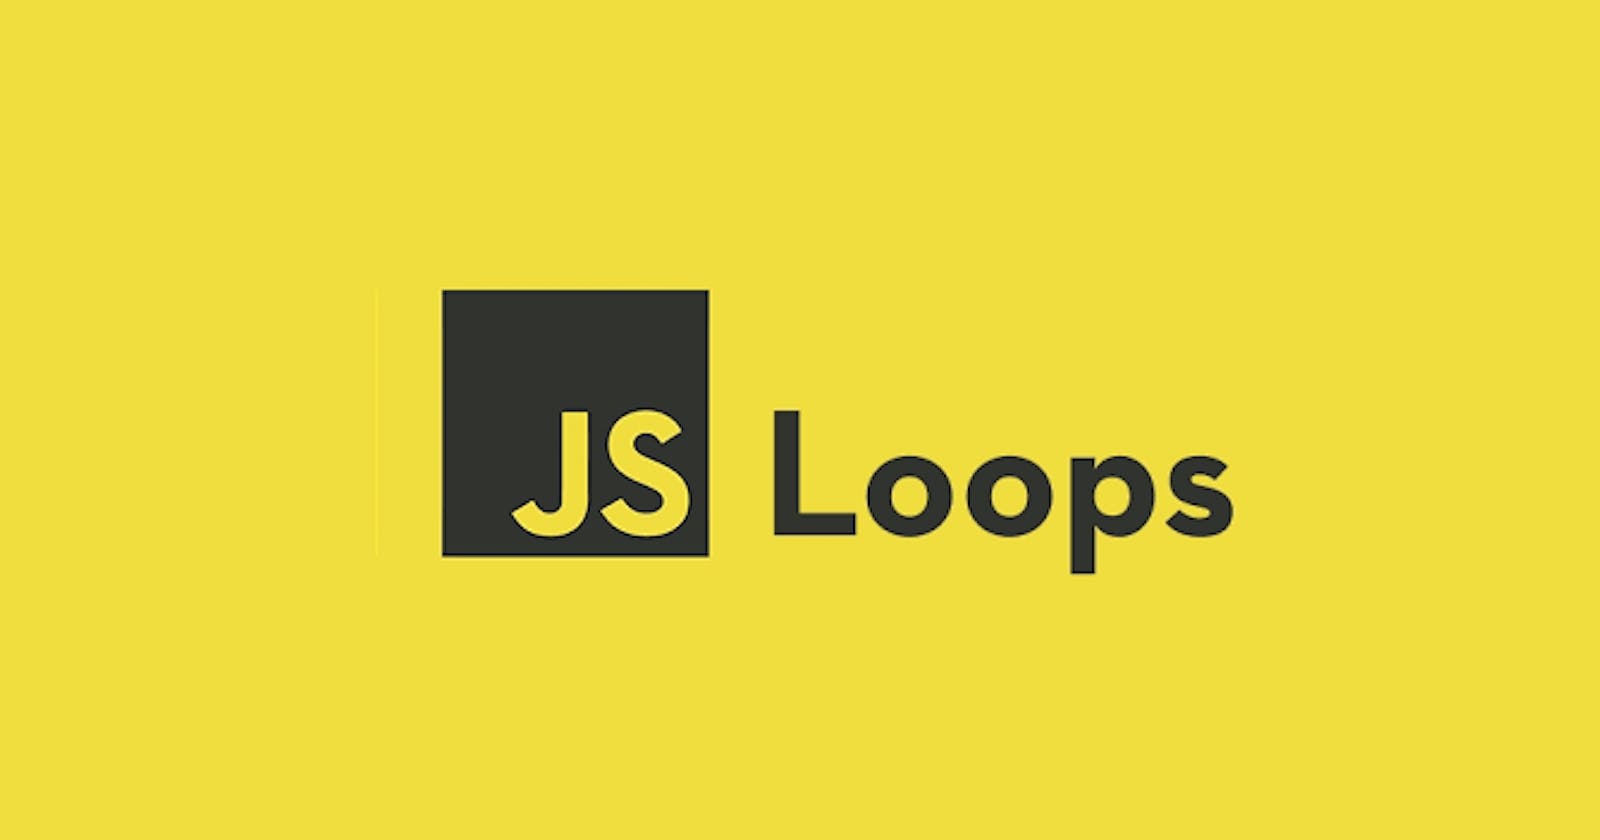 While and Do While Loops in JavaScript